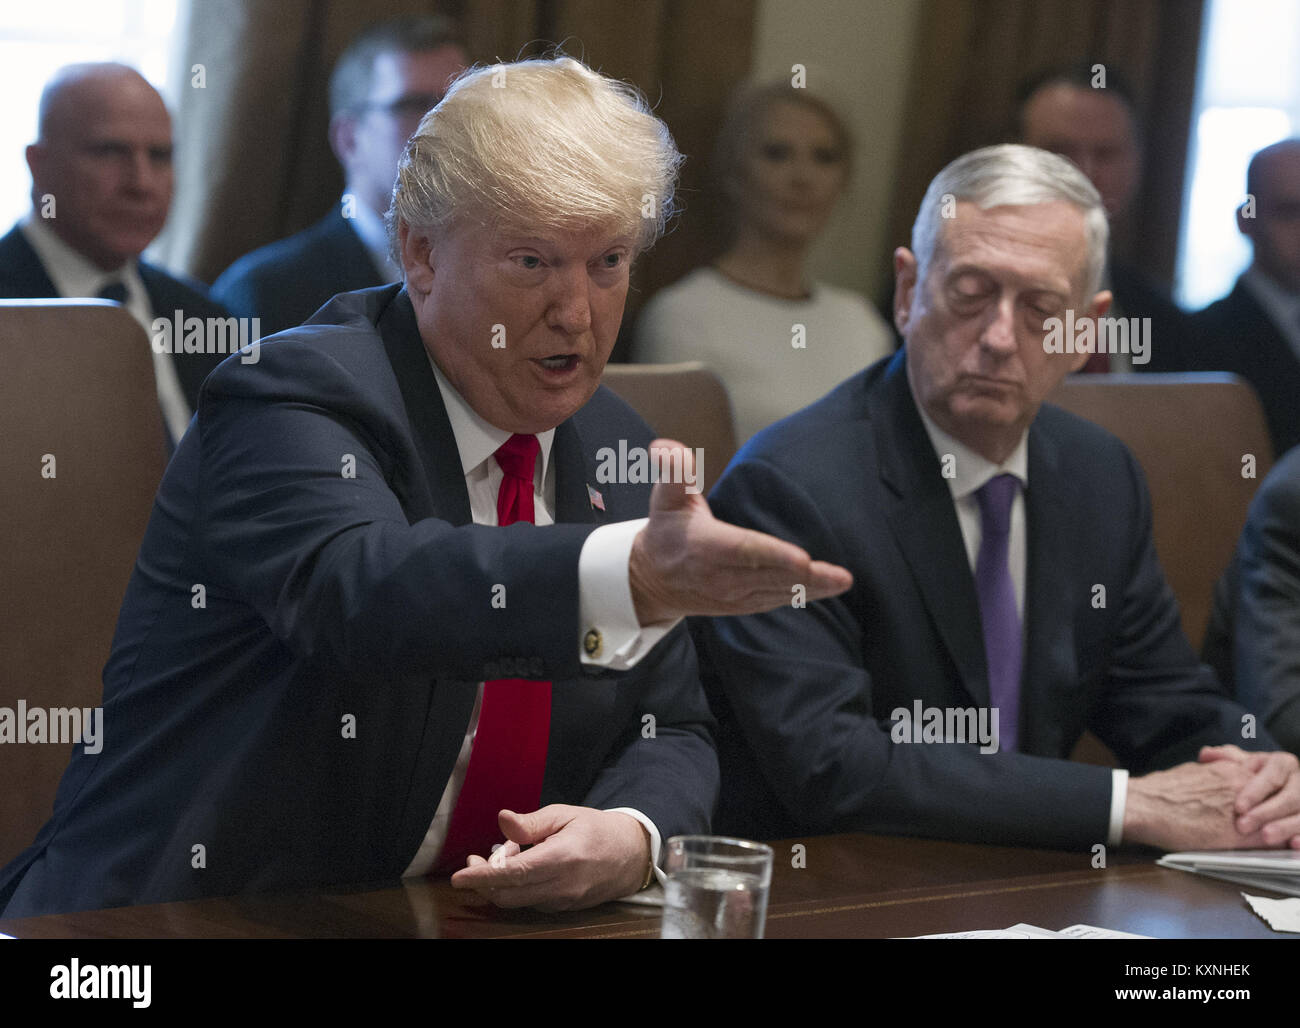 Washington, District of Columbia, USA. 10th Jan, 2018. United States President DONALD TRUMP makes opening remarks as he holds a Cabinet meeting in the Cabinet Room of the White House. Looking on from right is US Secretary of Defense Jim Mattis. Credit: Ron Sachs/CNP/ZUMA Wire/Alamy Live News Stock Photo